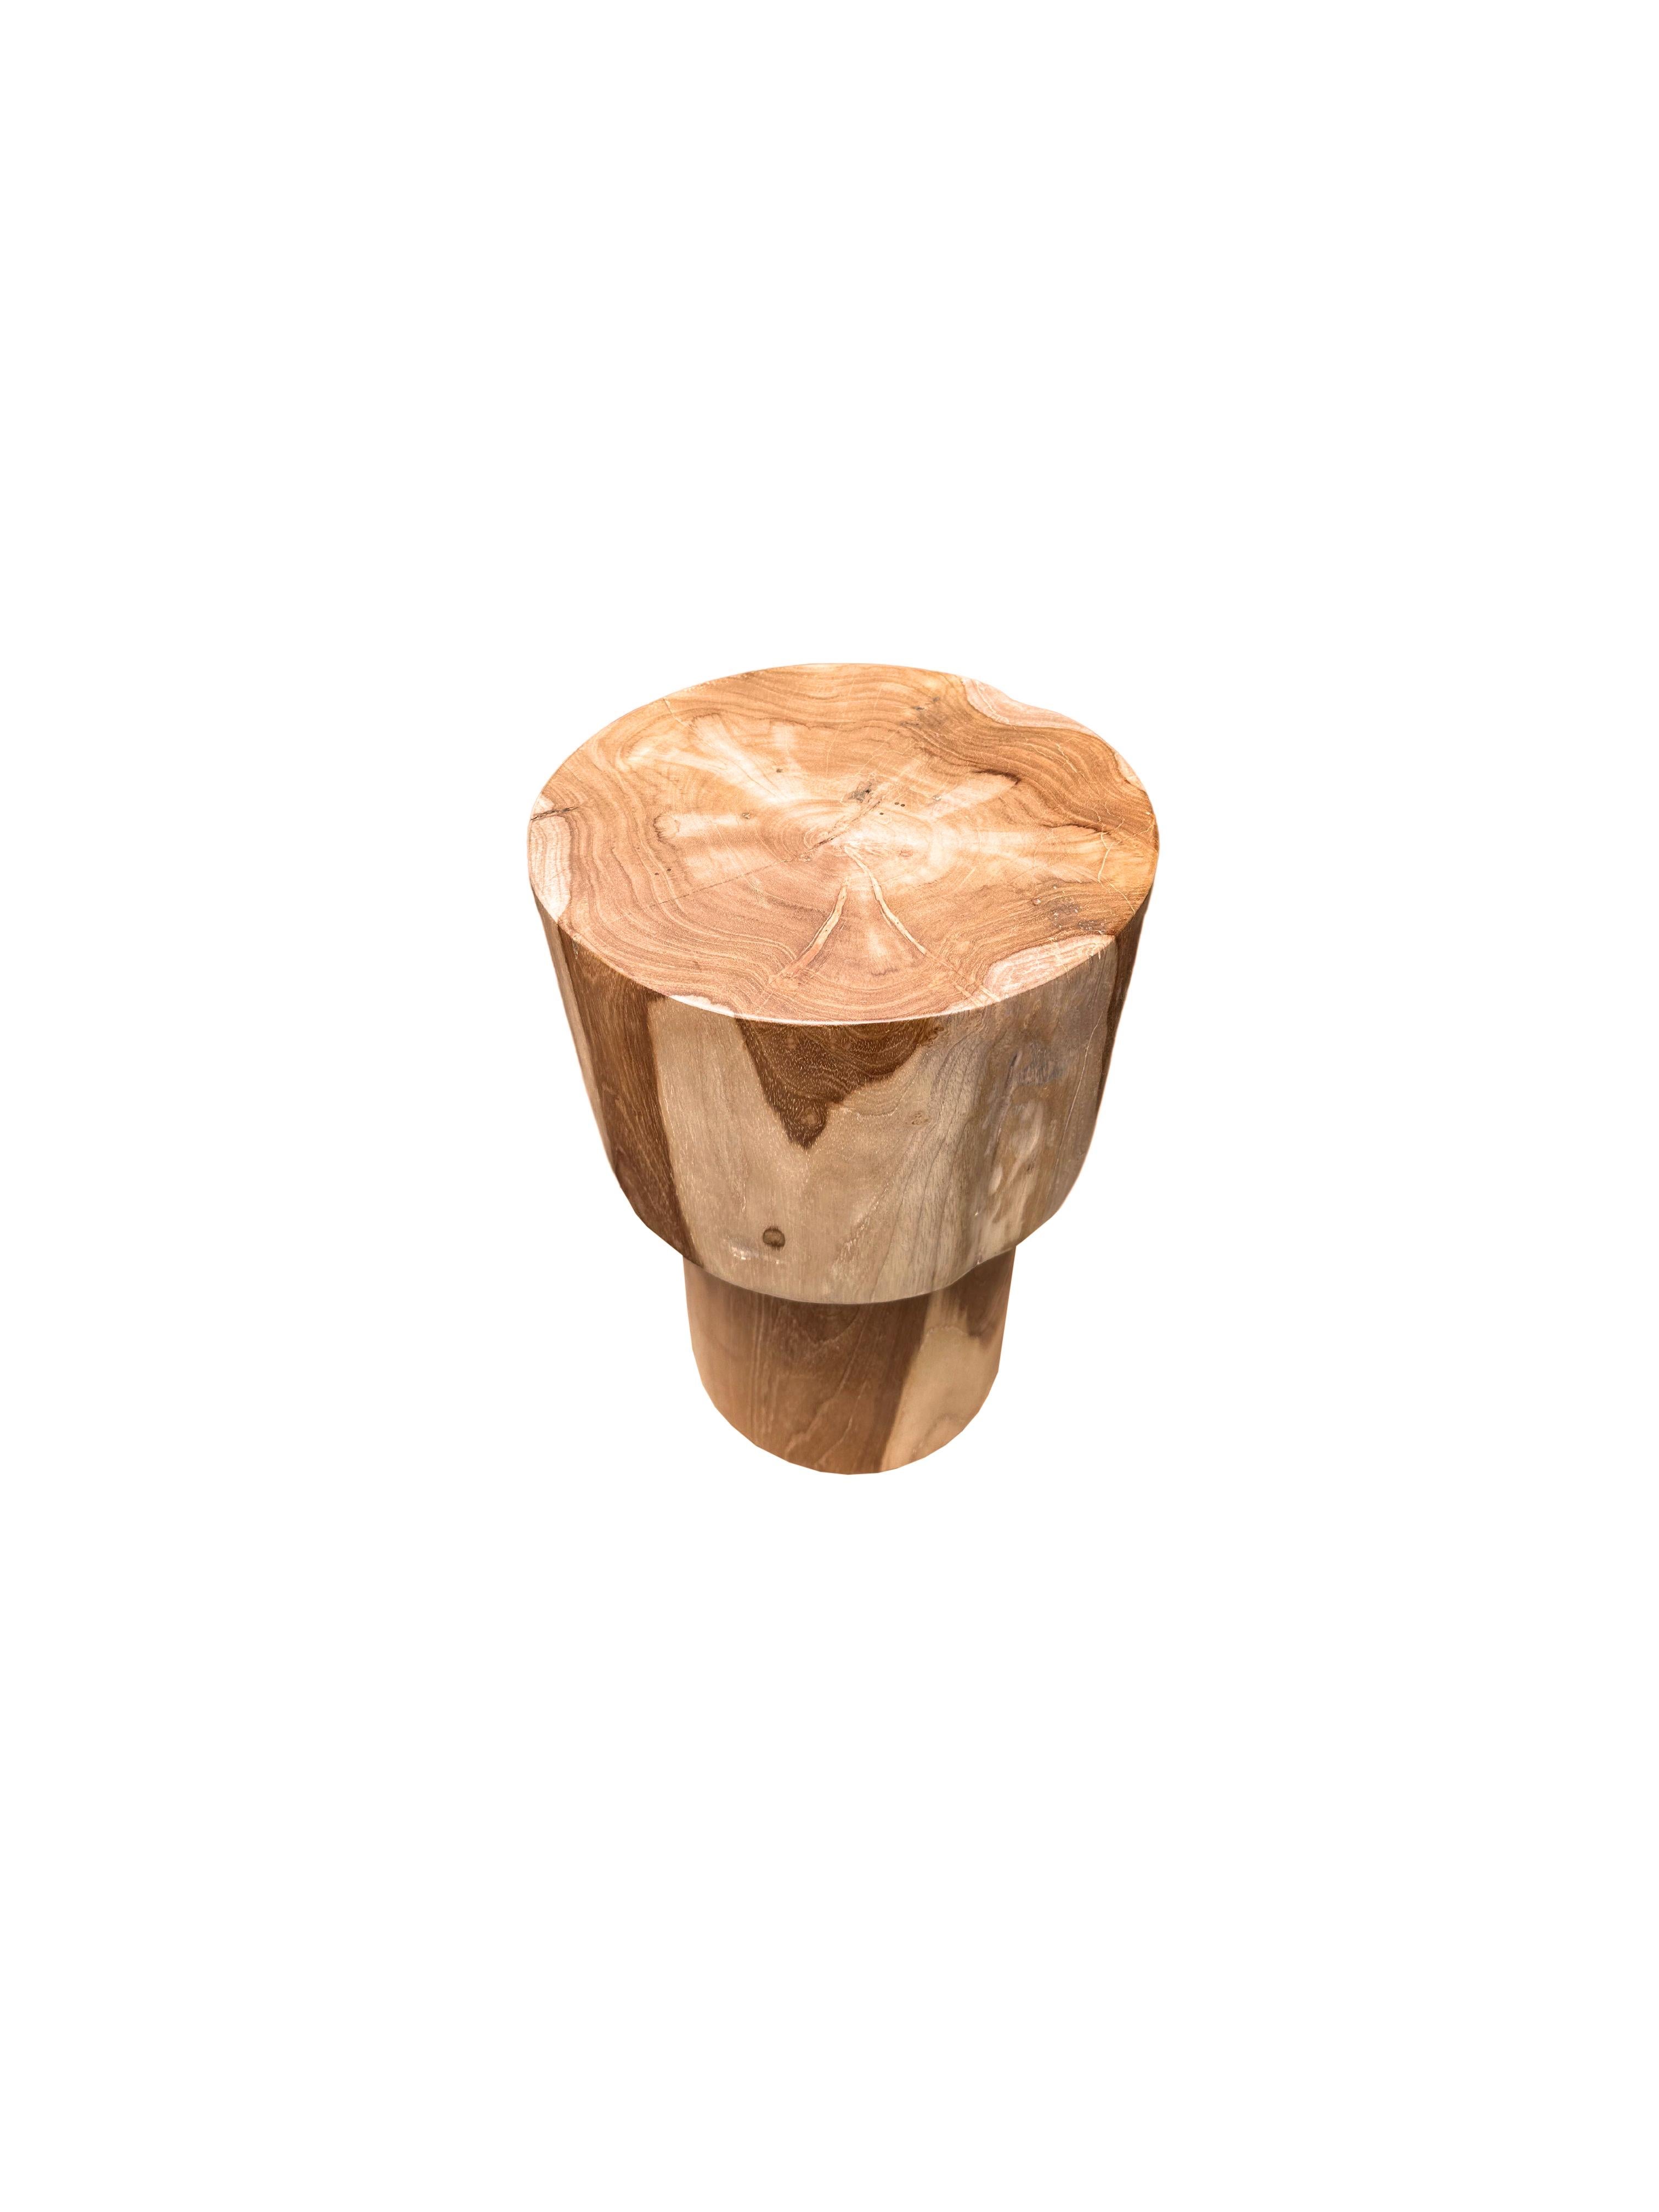 Hand-Crafted Sculptural Teak Wood Side Table, with Stunning Wood Textures, Modern Organic For Sale